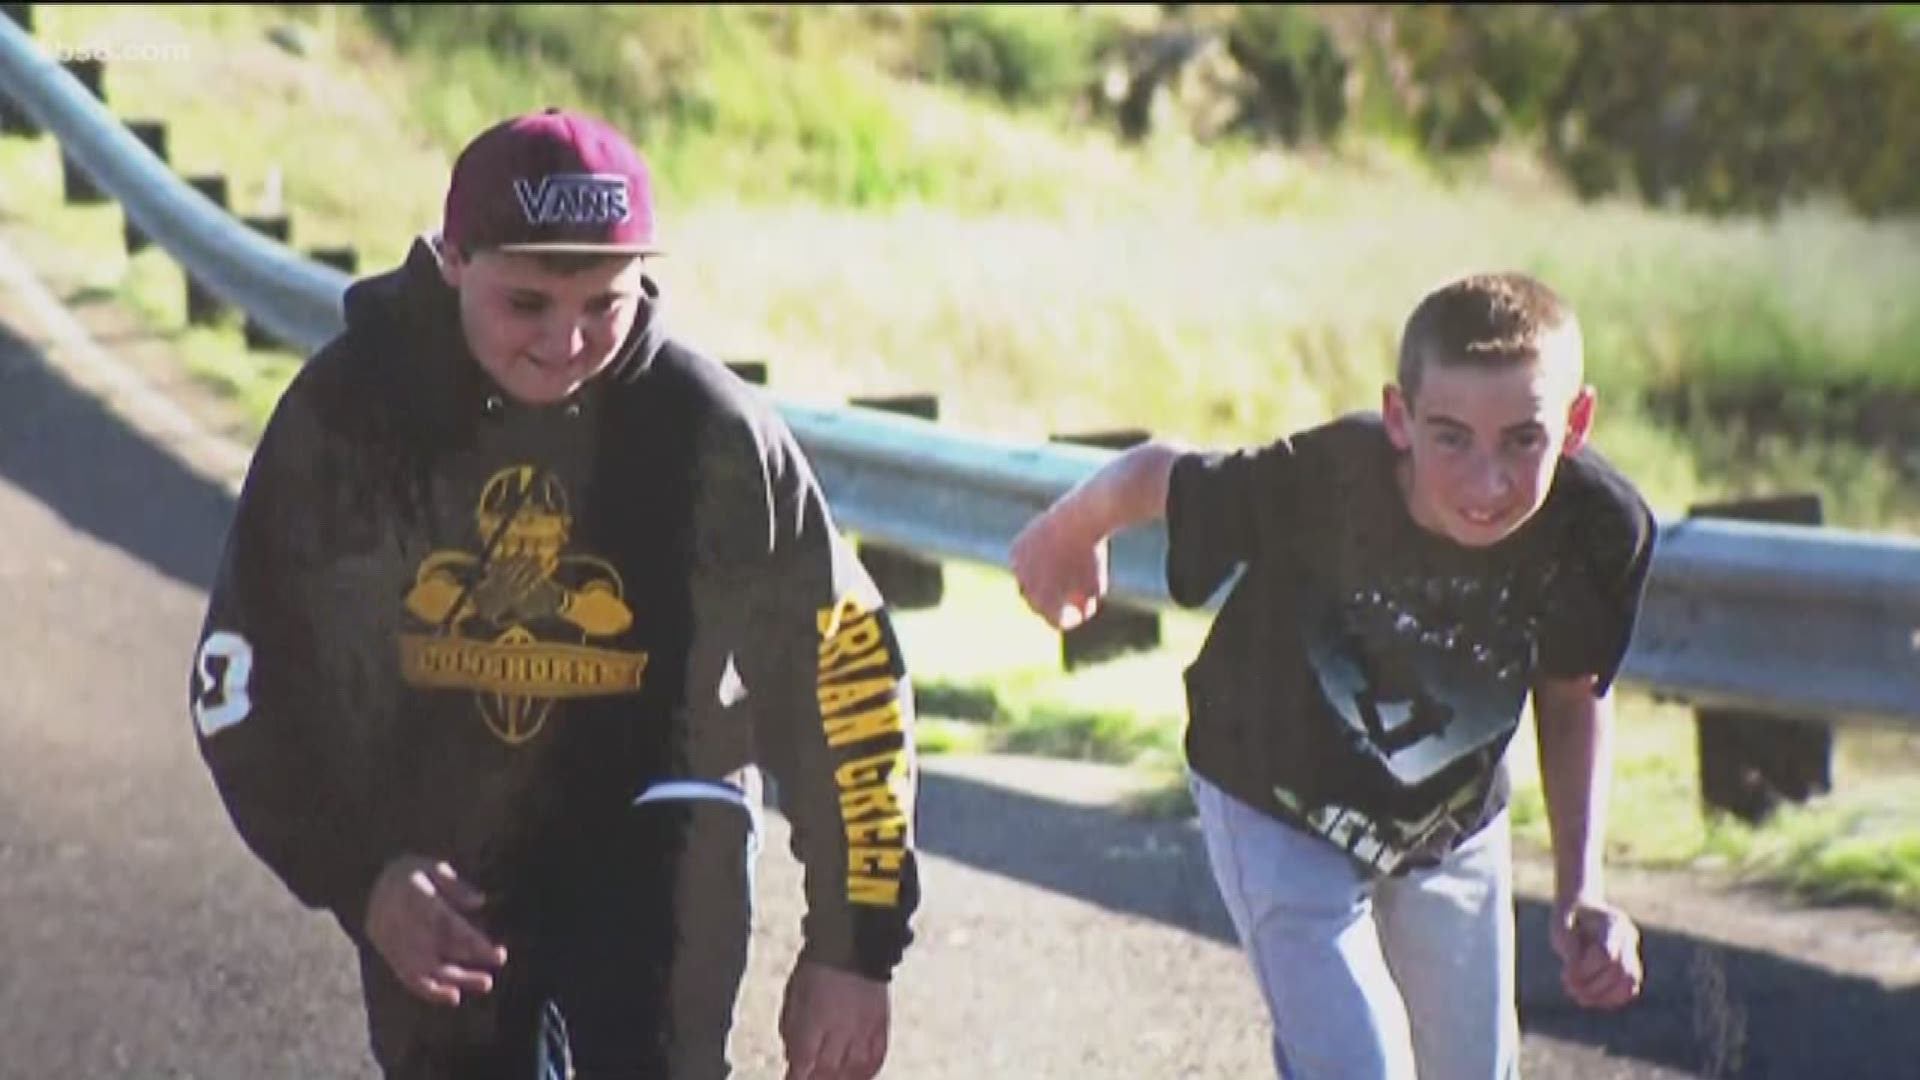 An East County community mourns the loss of two teen boys, who died in a car crash over the weekend.